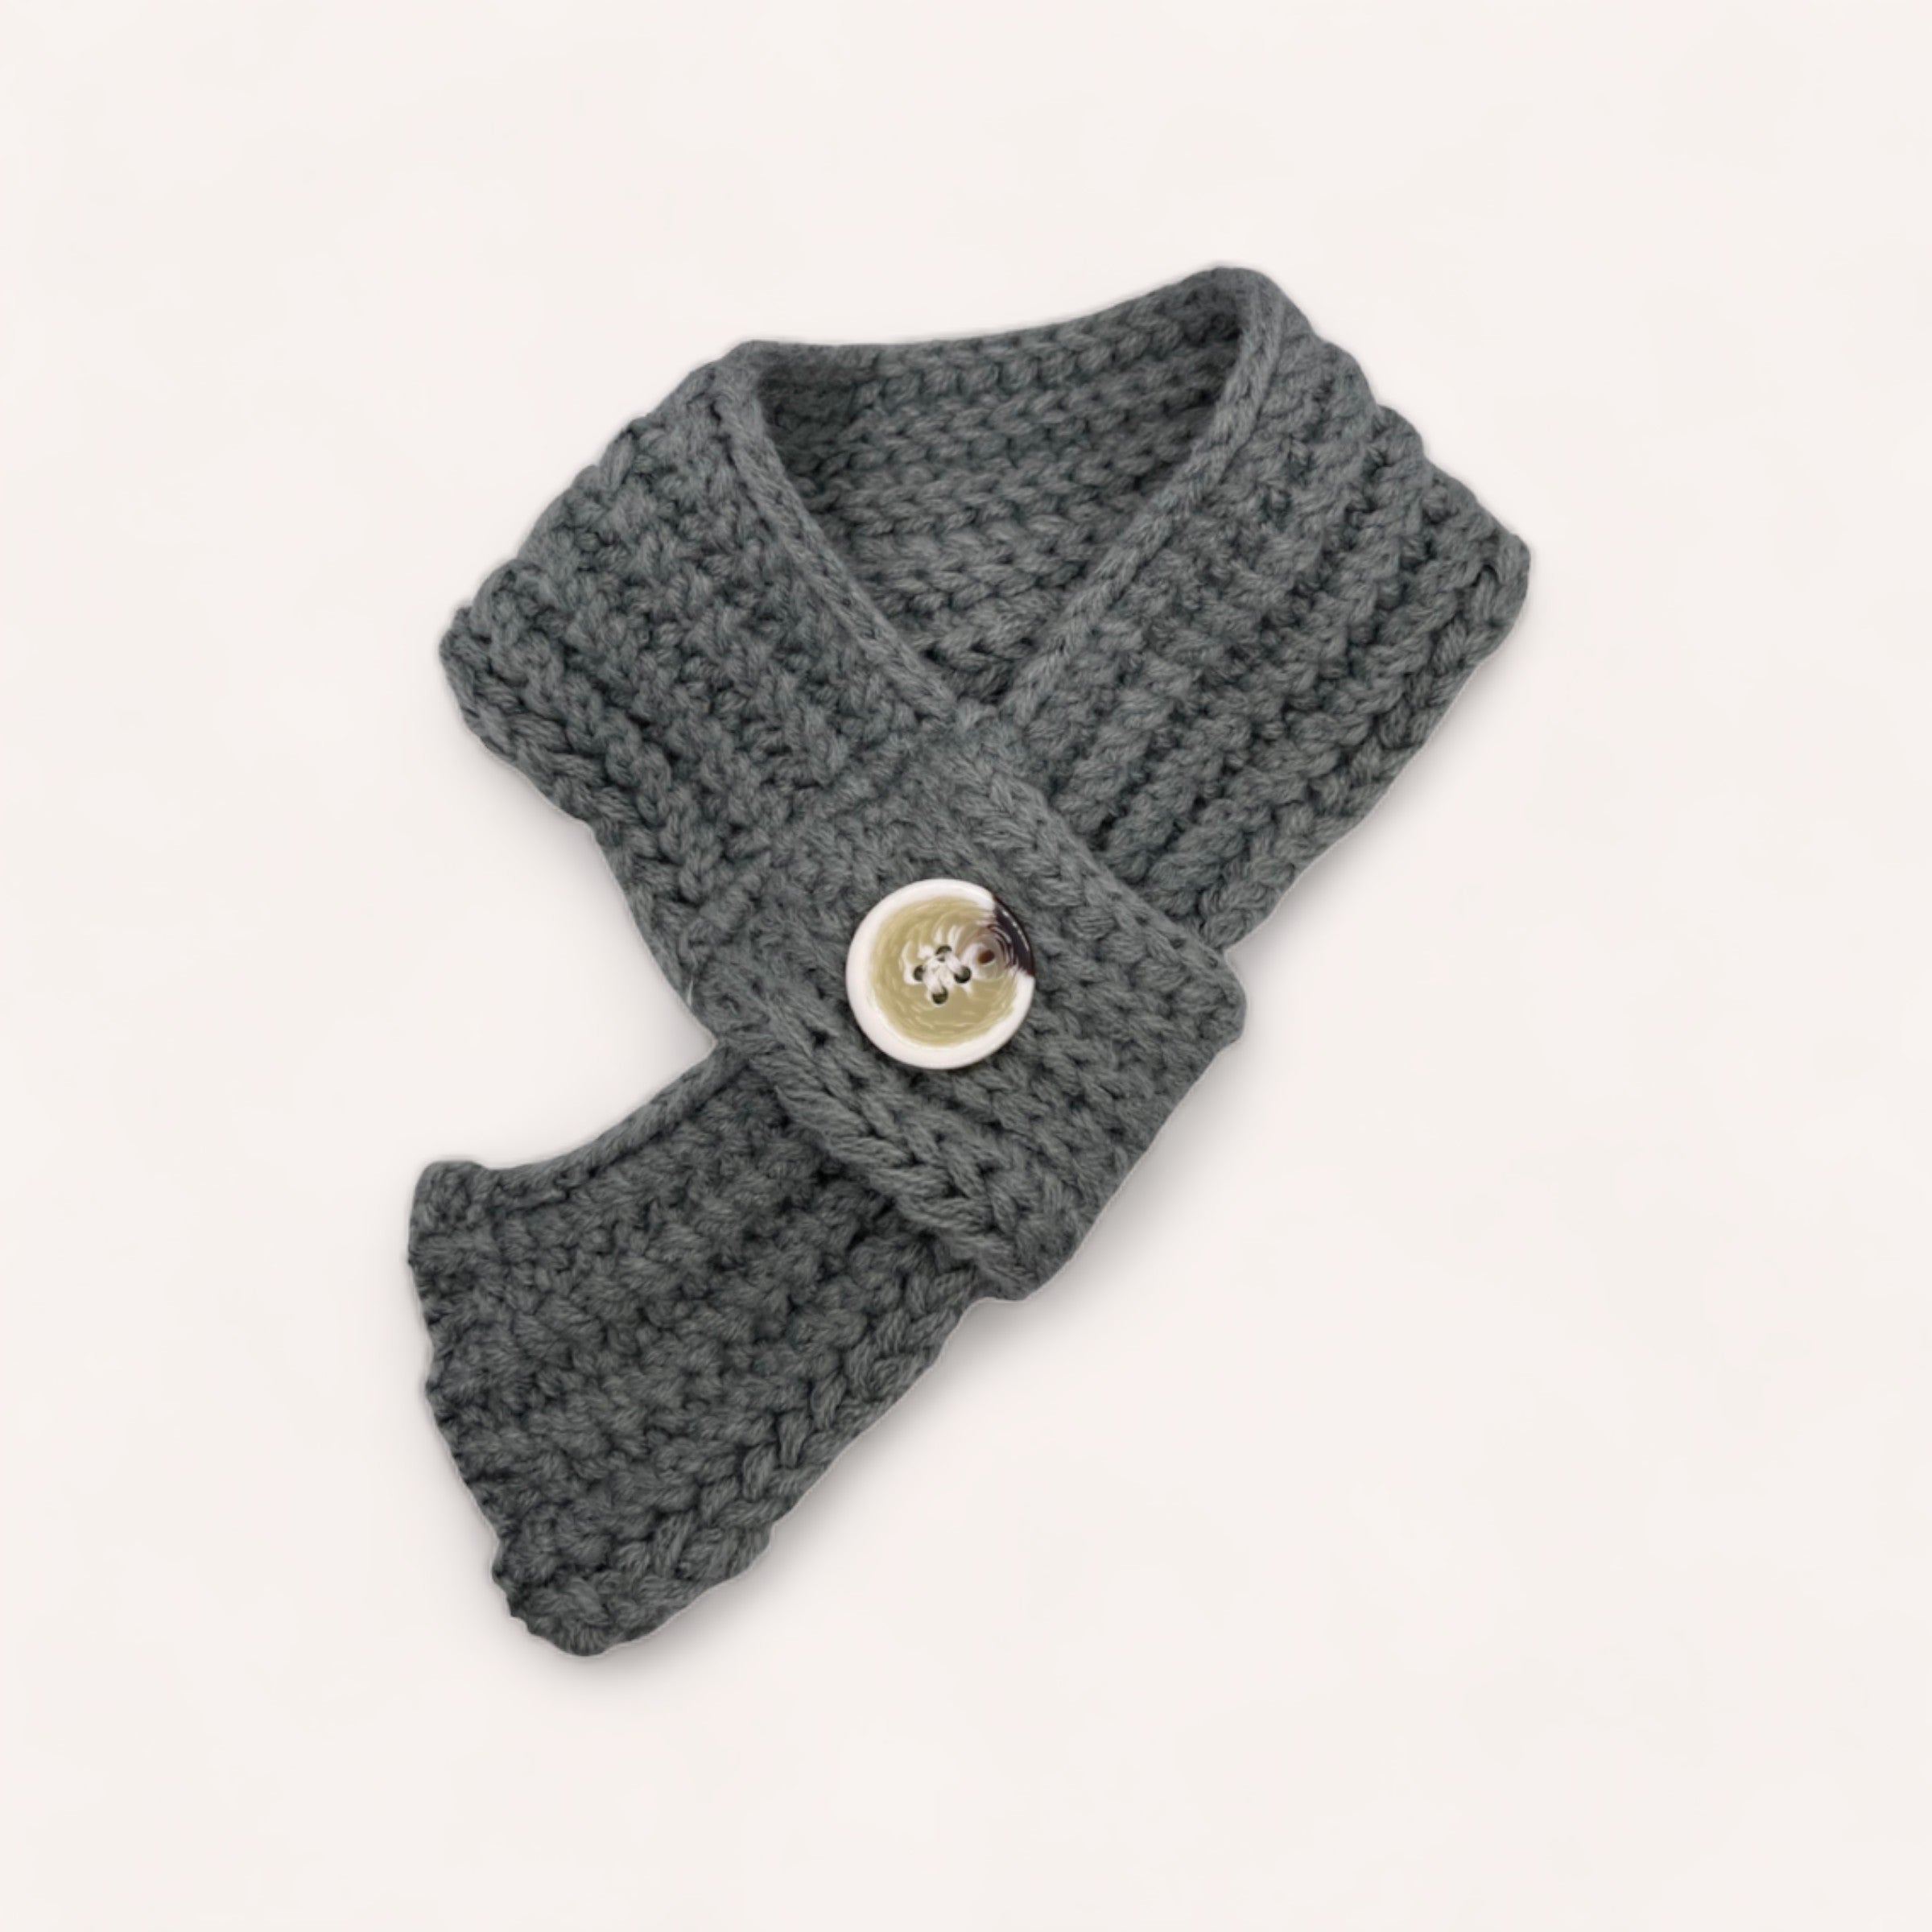 A gray, knitted Pet Scarf with a large button displayed on a white background, perfect as a pet winter accessory from giftbox co.